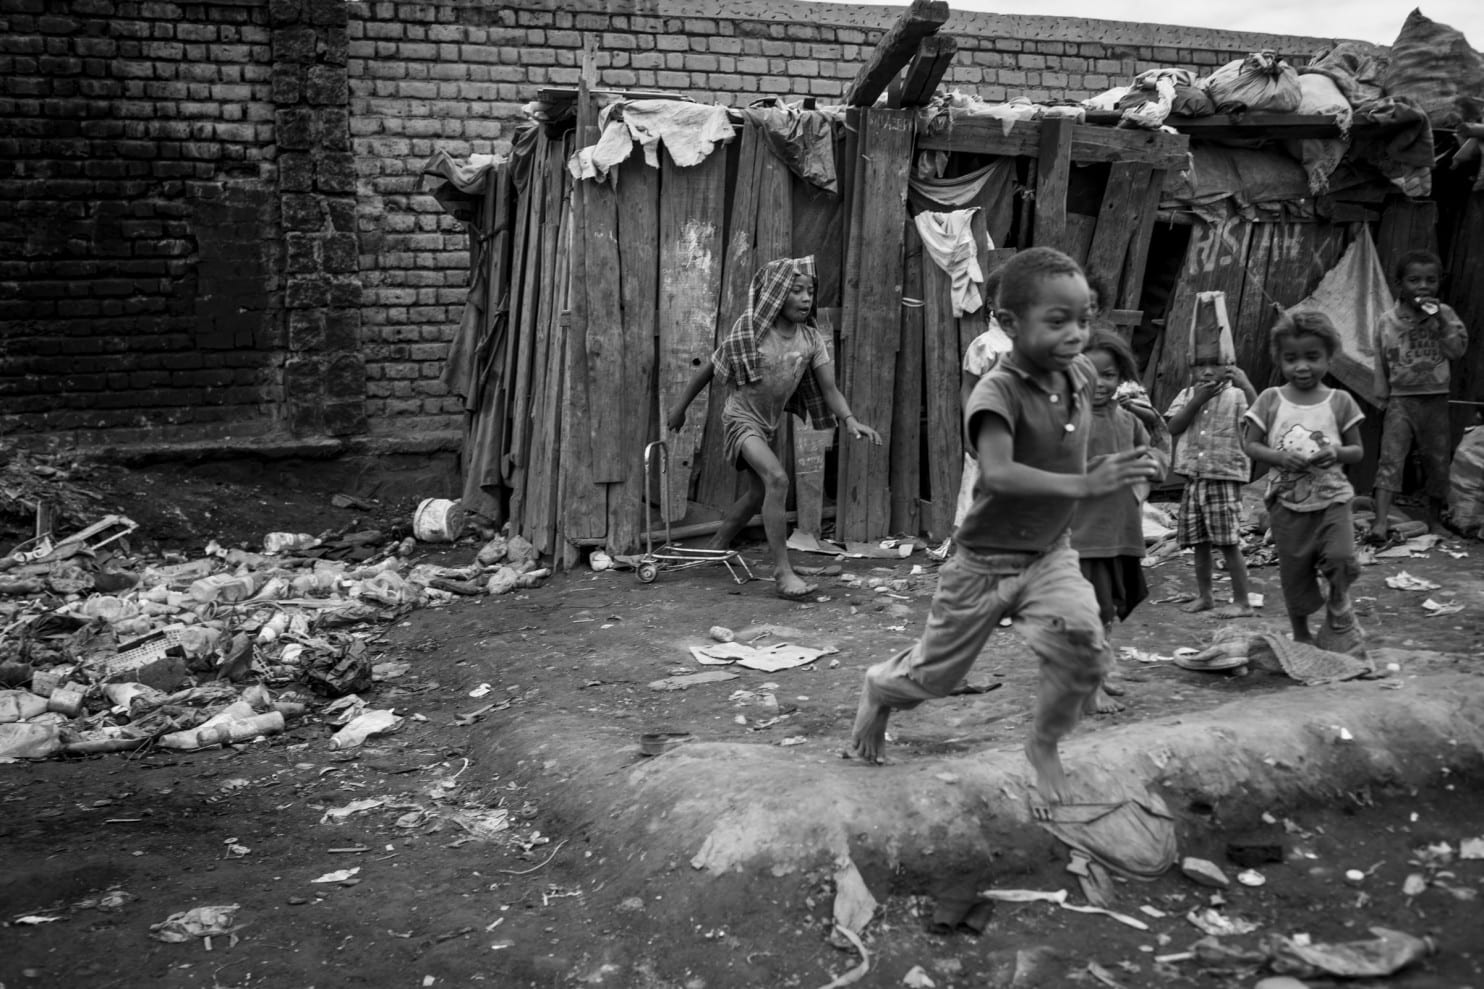 Slums in Antananarivo, the capital of Madagascar, where hygiene is very poor. The presence of rodents and fleas is rampant in the slums. (Christian Werner/Laif), Washington Post